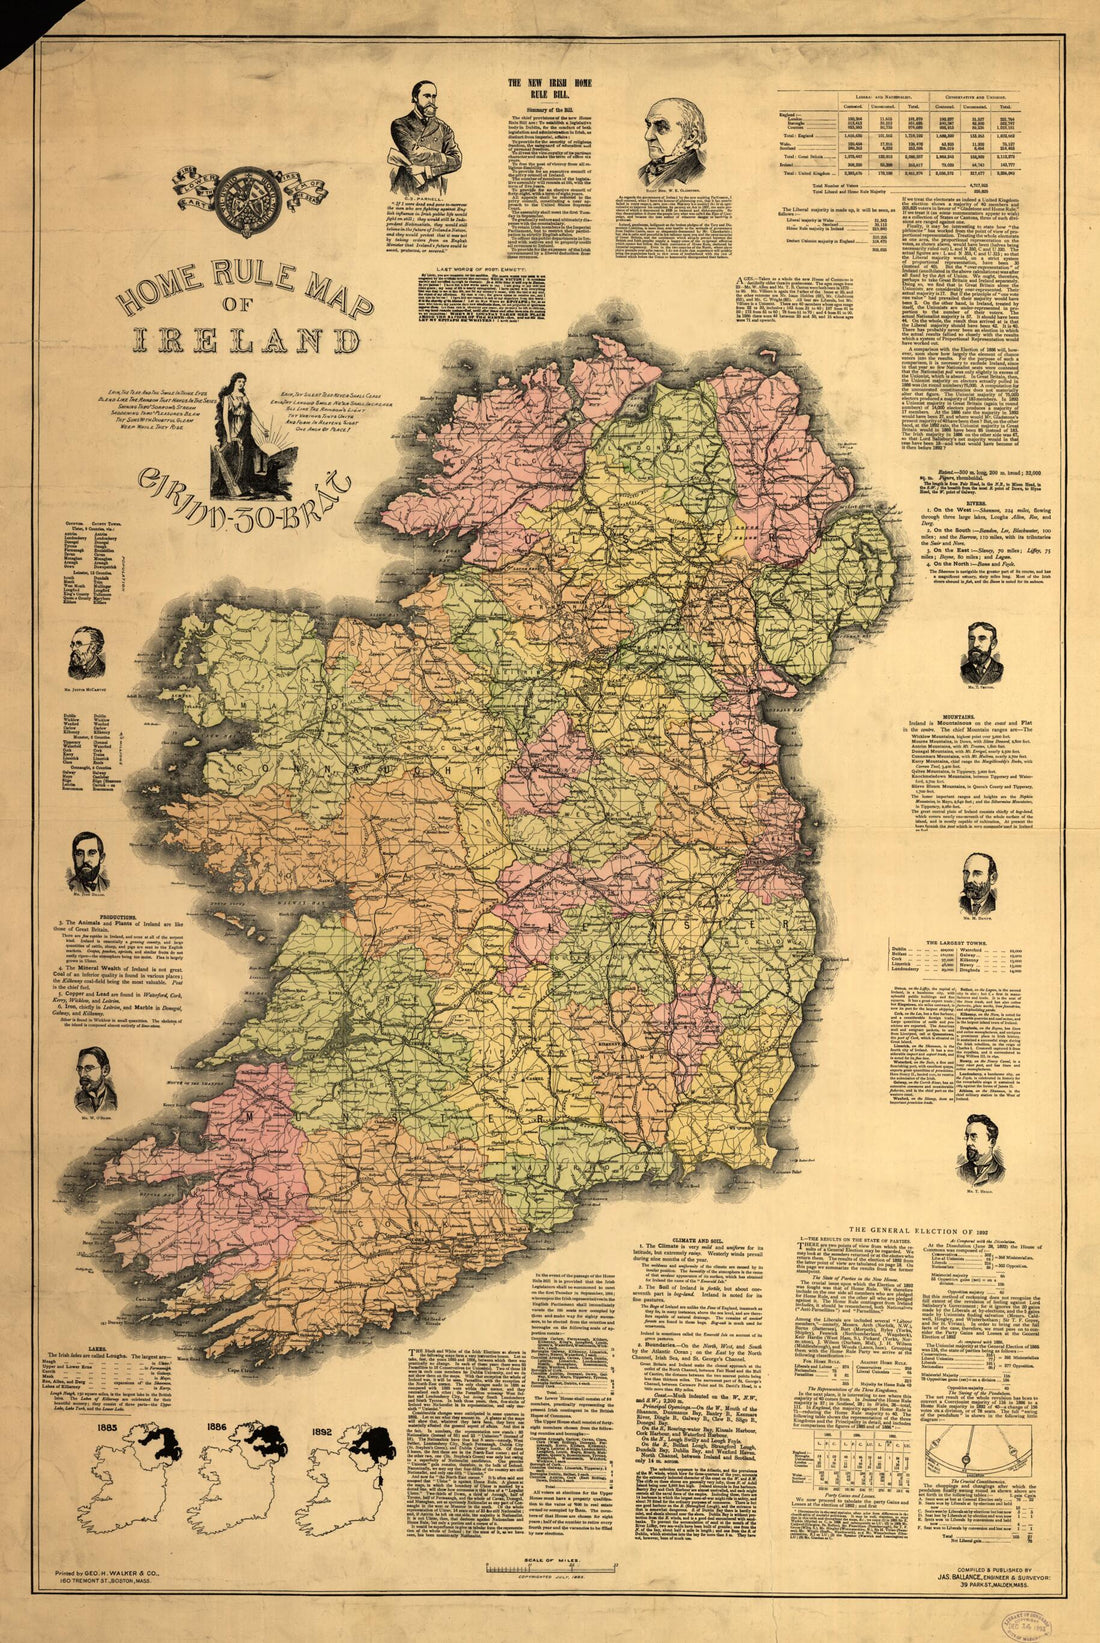 This old map of Home Rule Map of Ireland from 1893 was created by Jas Ballance in 1893